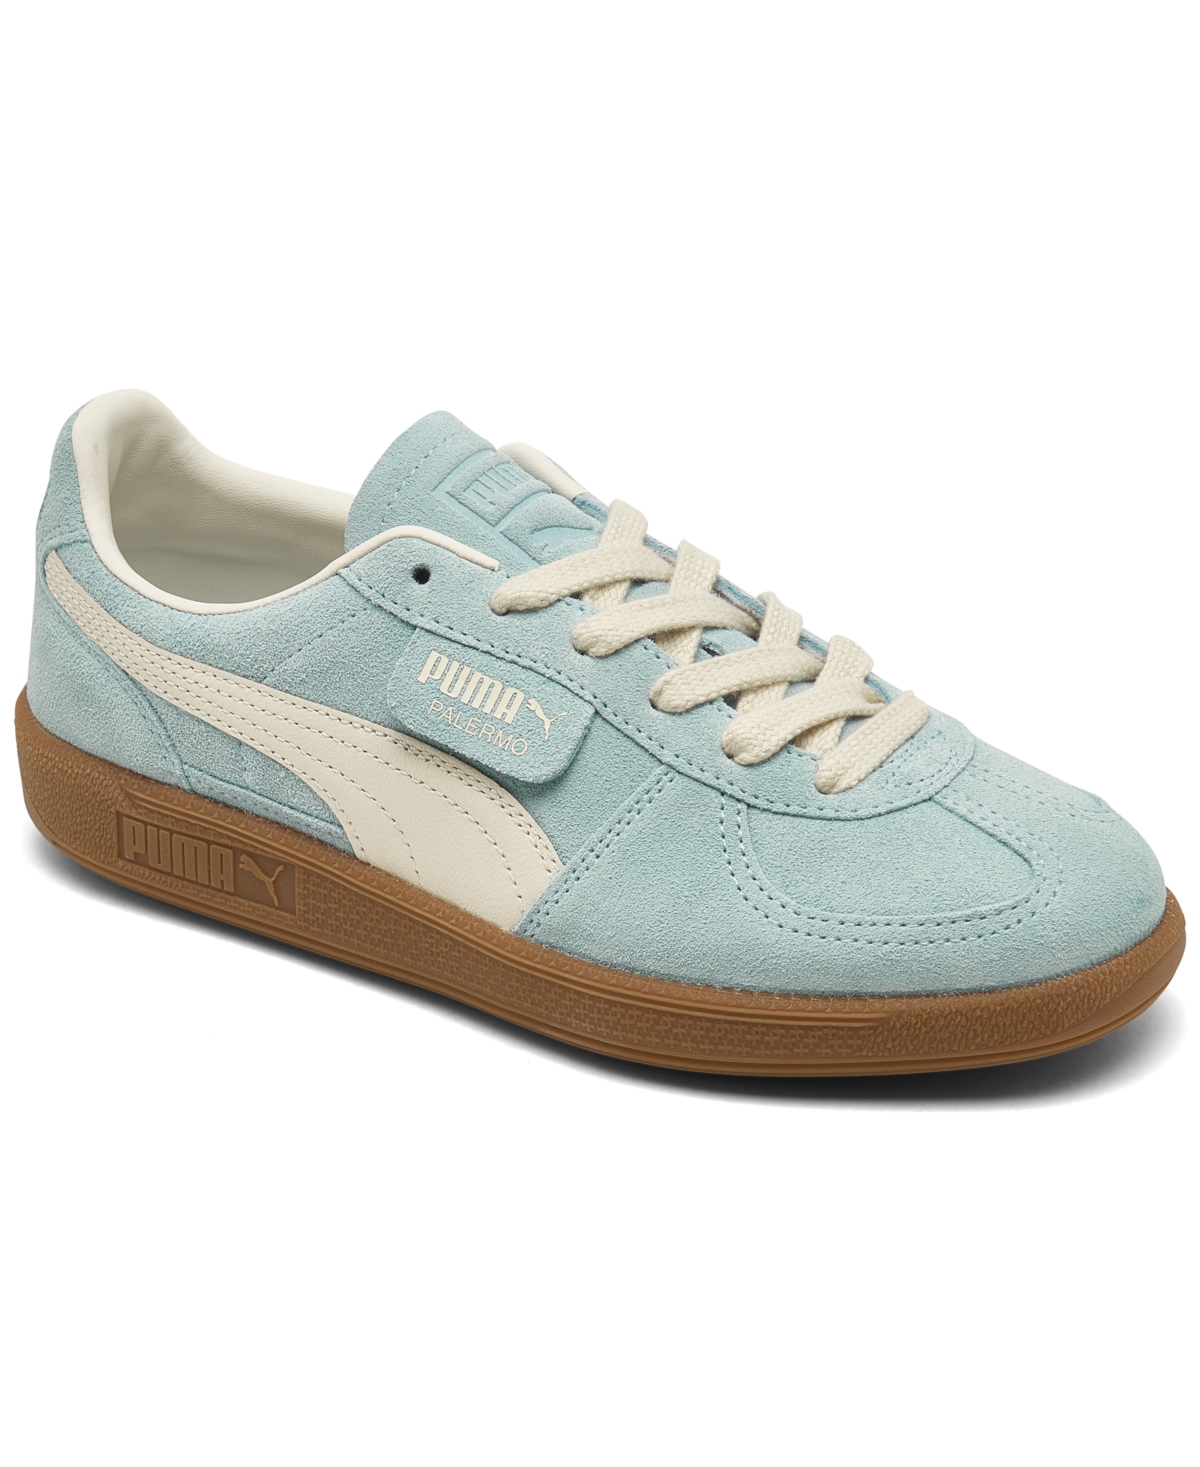 Women's Palermo Casual Sneakers from Finish Line - Light Blue/Gum